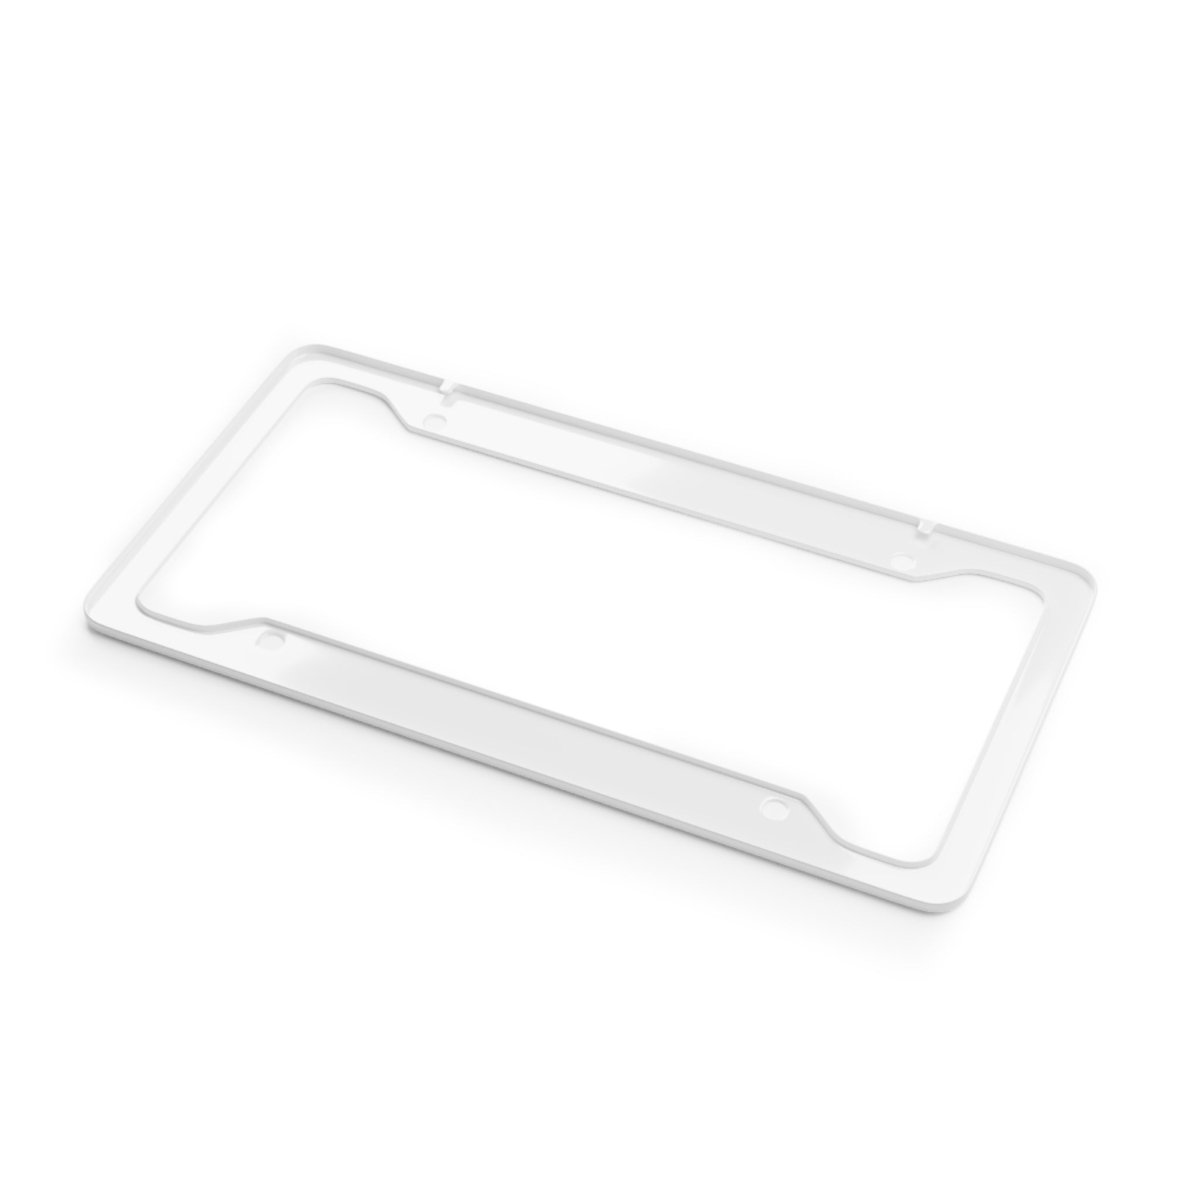 American Heriitage License Plate Frame - Cultics